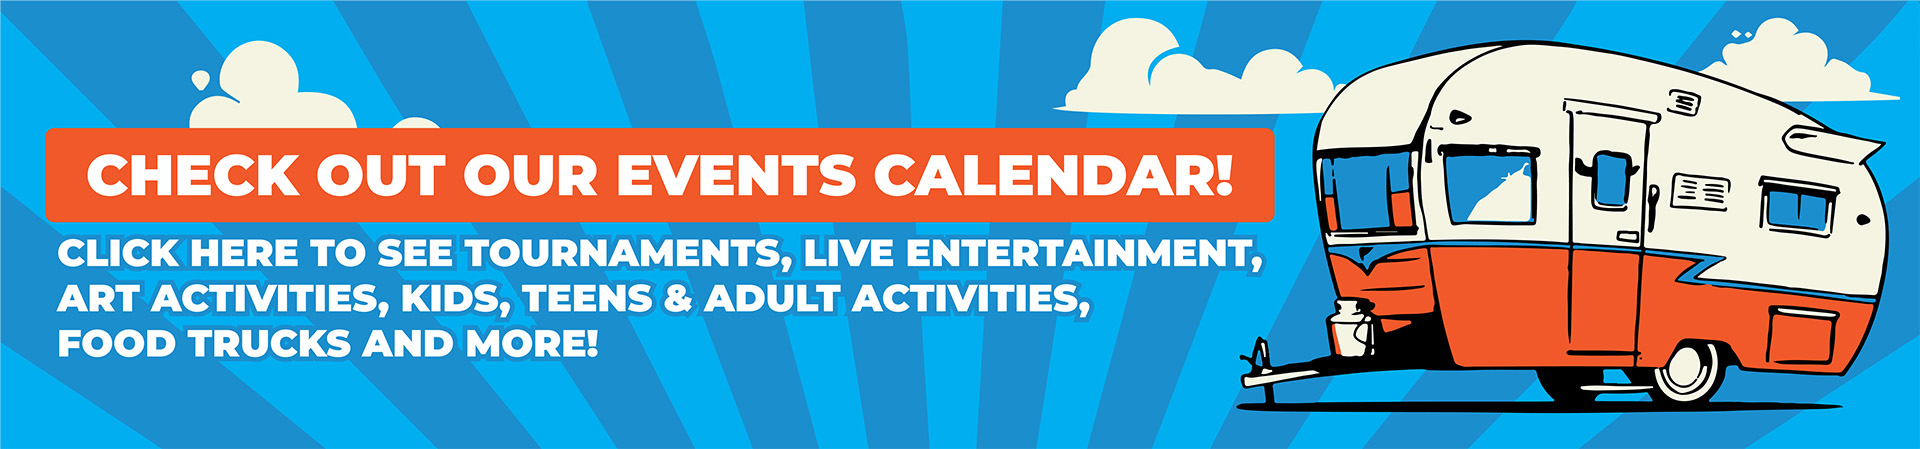 Check out our events calendar!